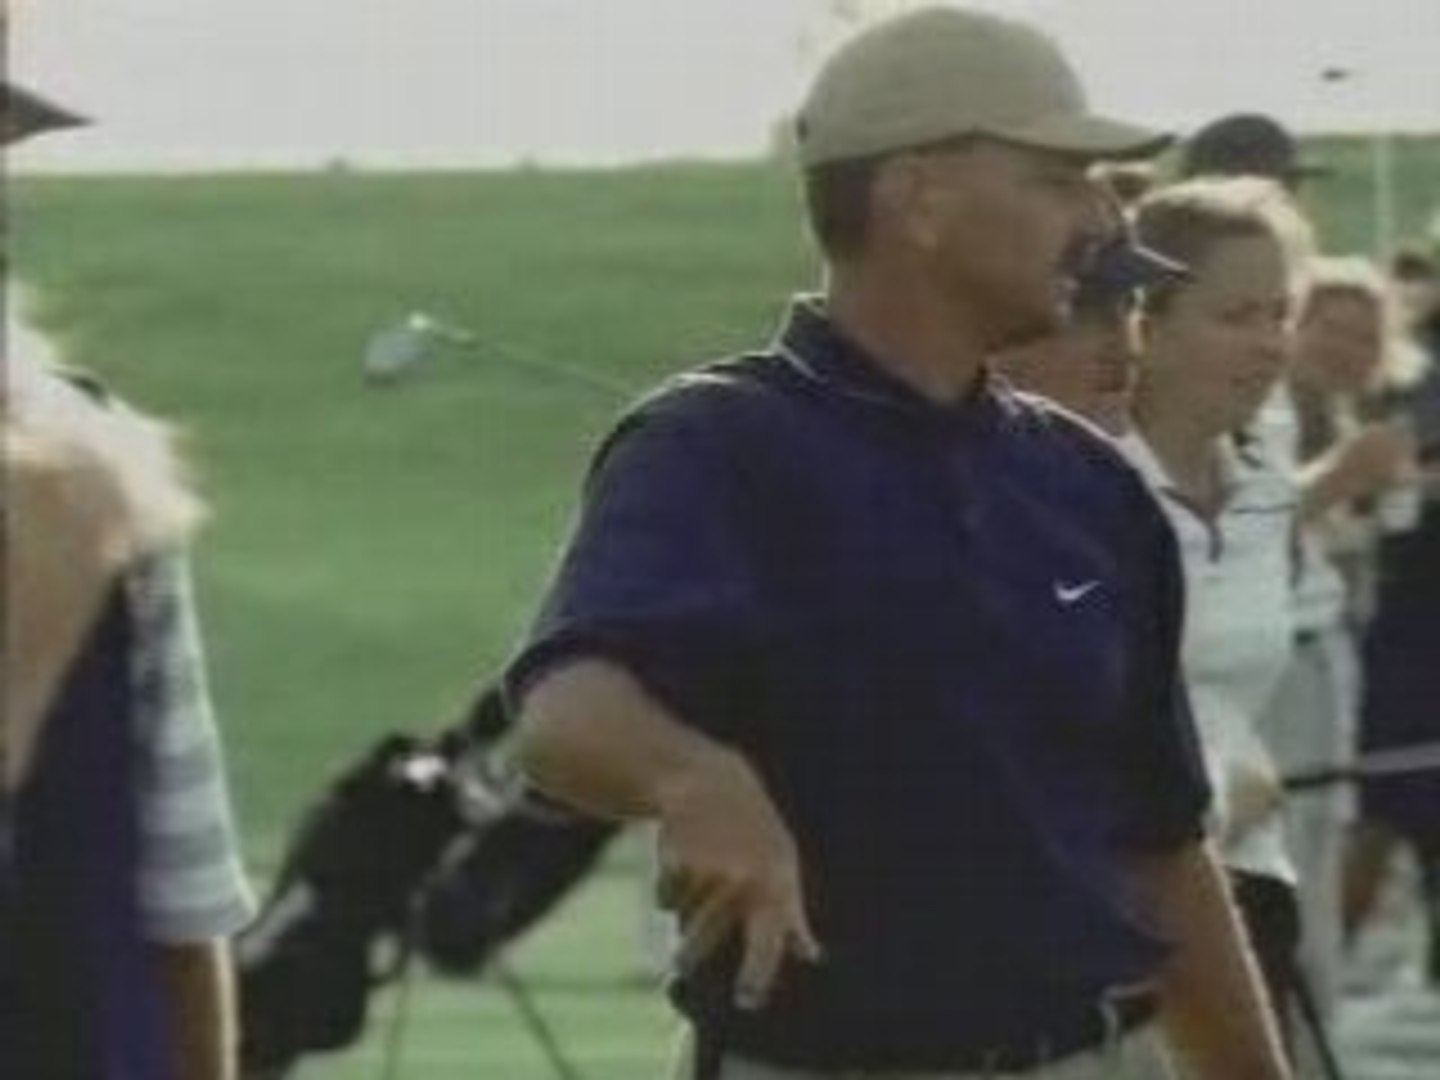 Nike golf commercial - tiger woods driving range - Vidéo Dailymotion